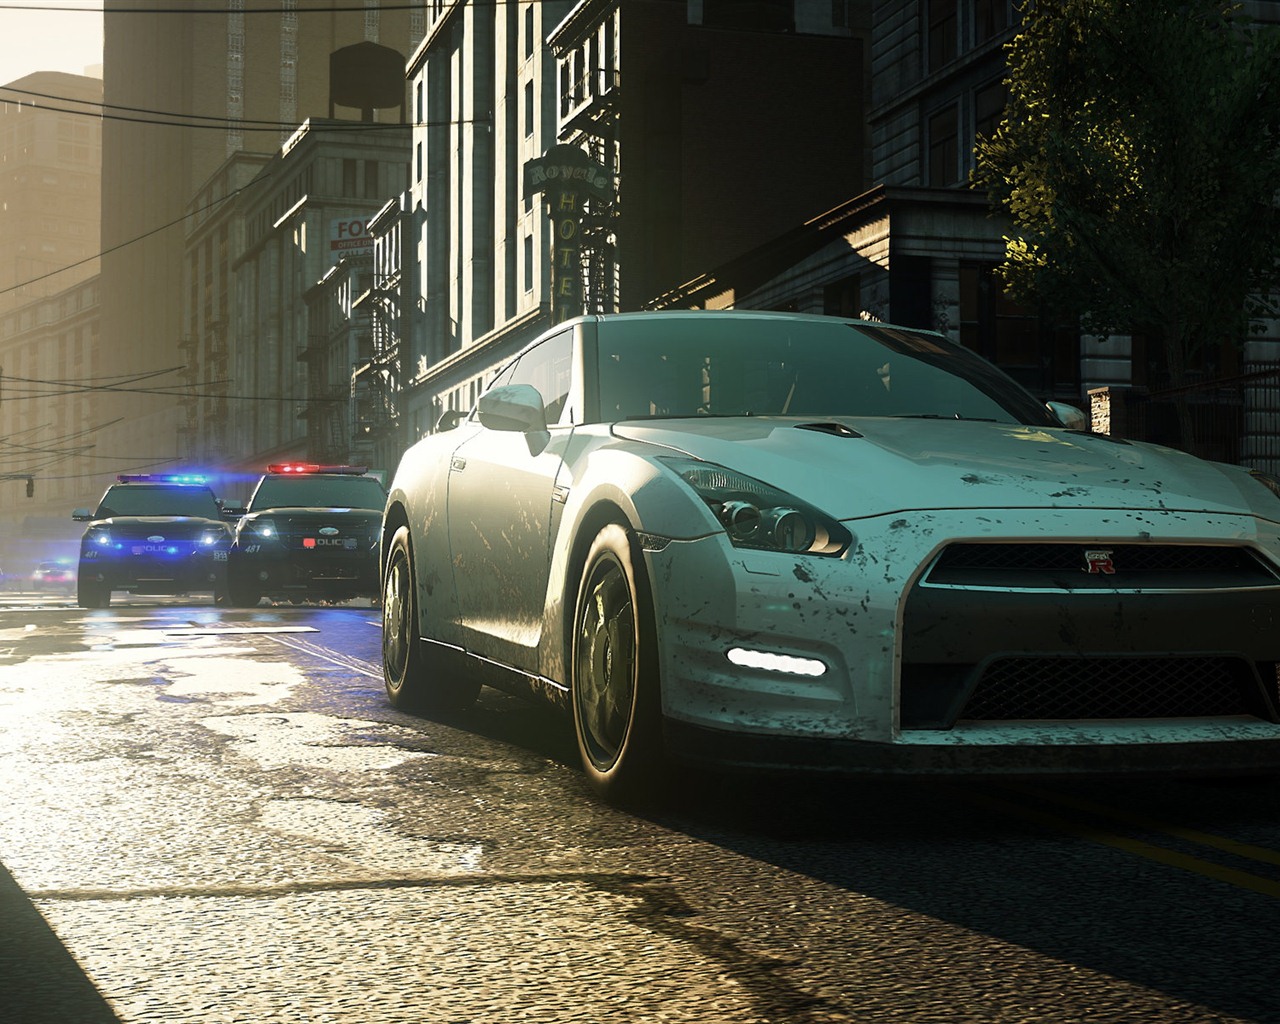 Need for Speed: Most Wanted 极品飞车17：最高通缉 高清壁纸20 - 1280x1024